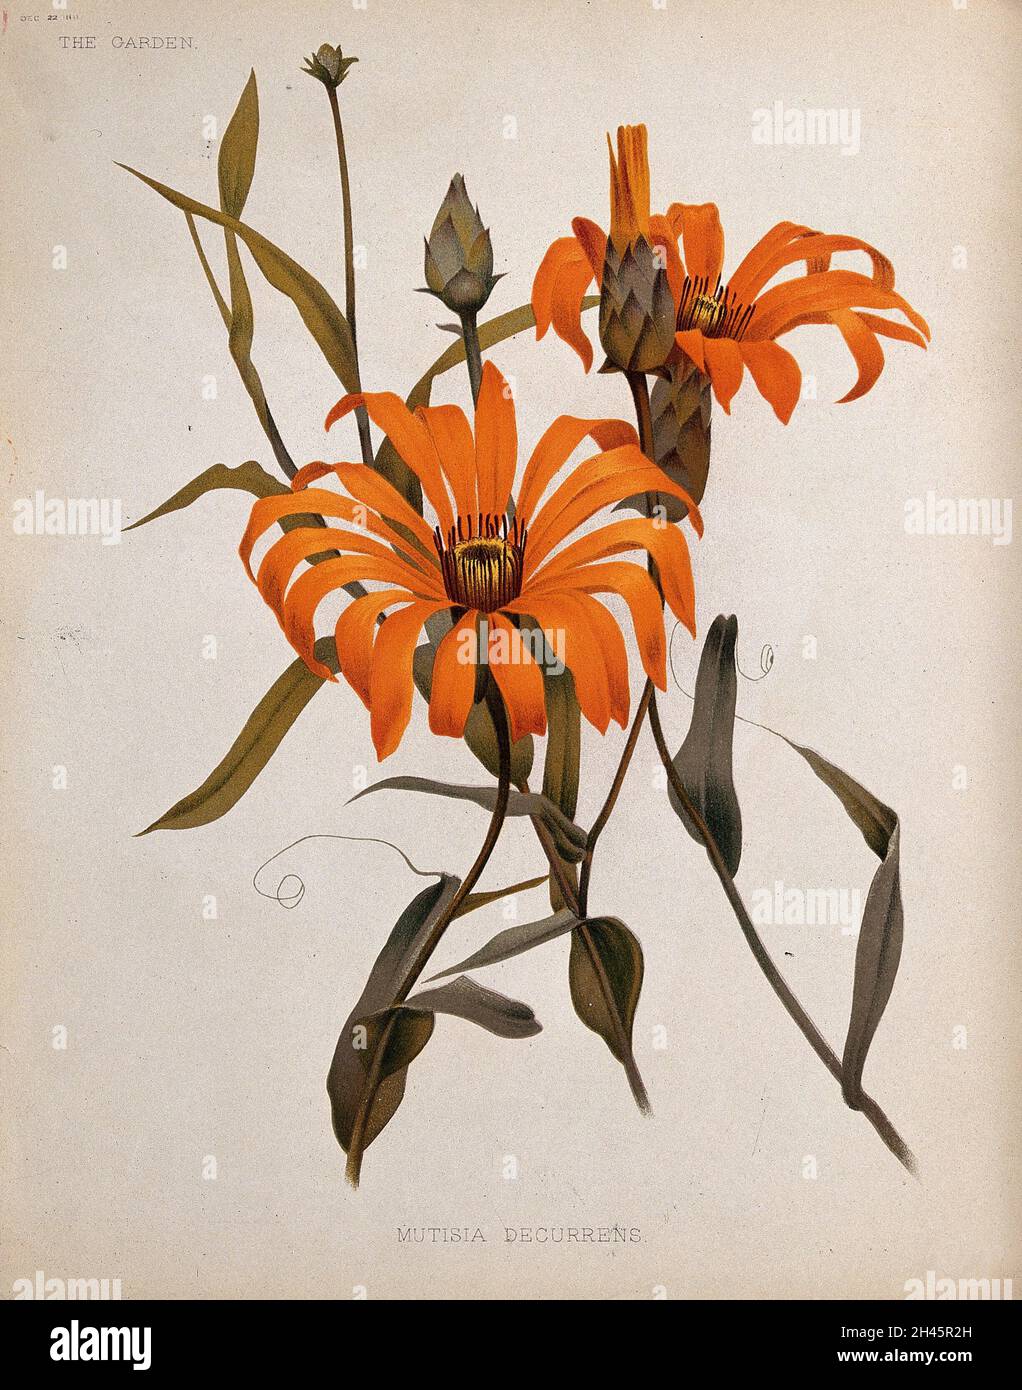 A plant (Mutisia decurrens): flowering stems. Chromolithograph, c. 1882, after H. Moon. Stock Photo